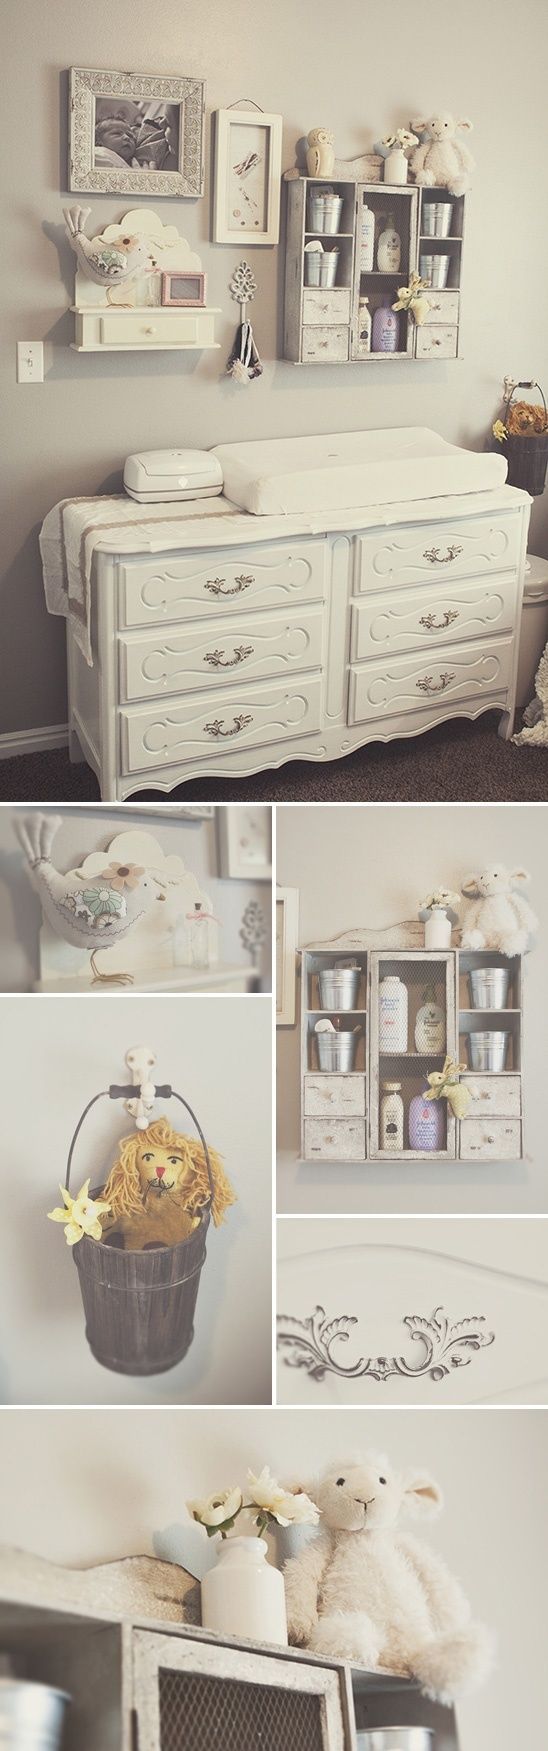 A vintage dresser as a changing table, a wall collage and a neutral color palate is so SoBo!